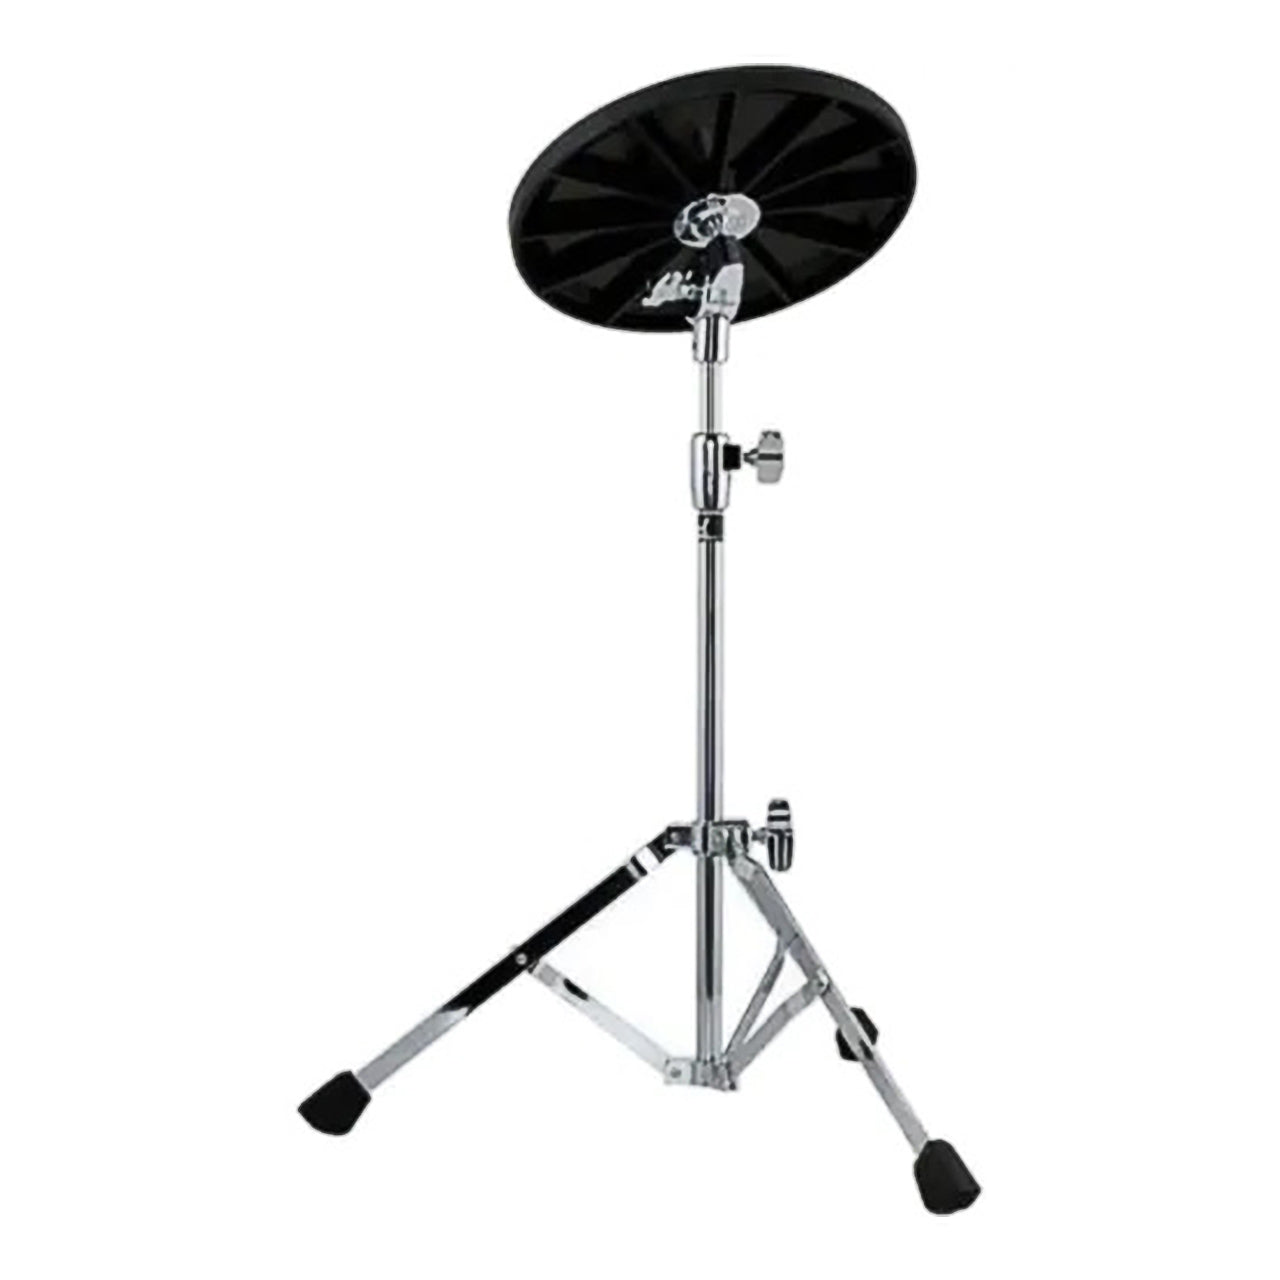 Pearl SD50 8-inch Practice Pad with Adjustable Stand Heavy Duty 8mm Threading for Snare Cymbal Drum Silent Training